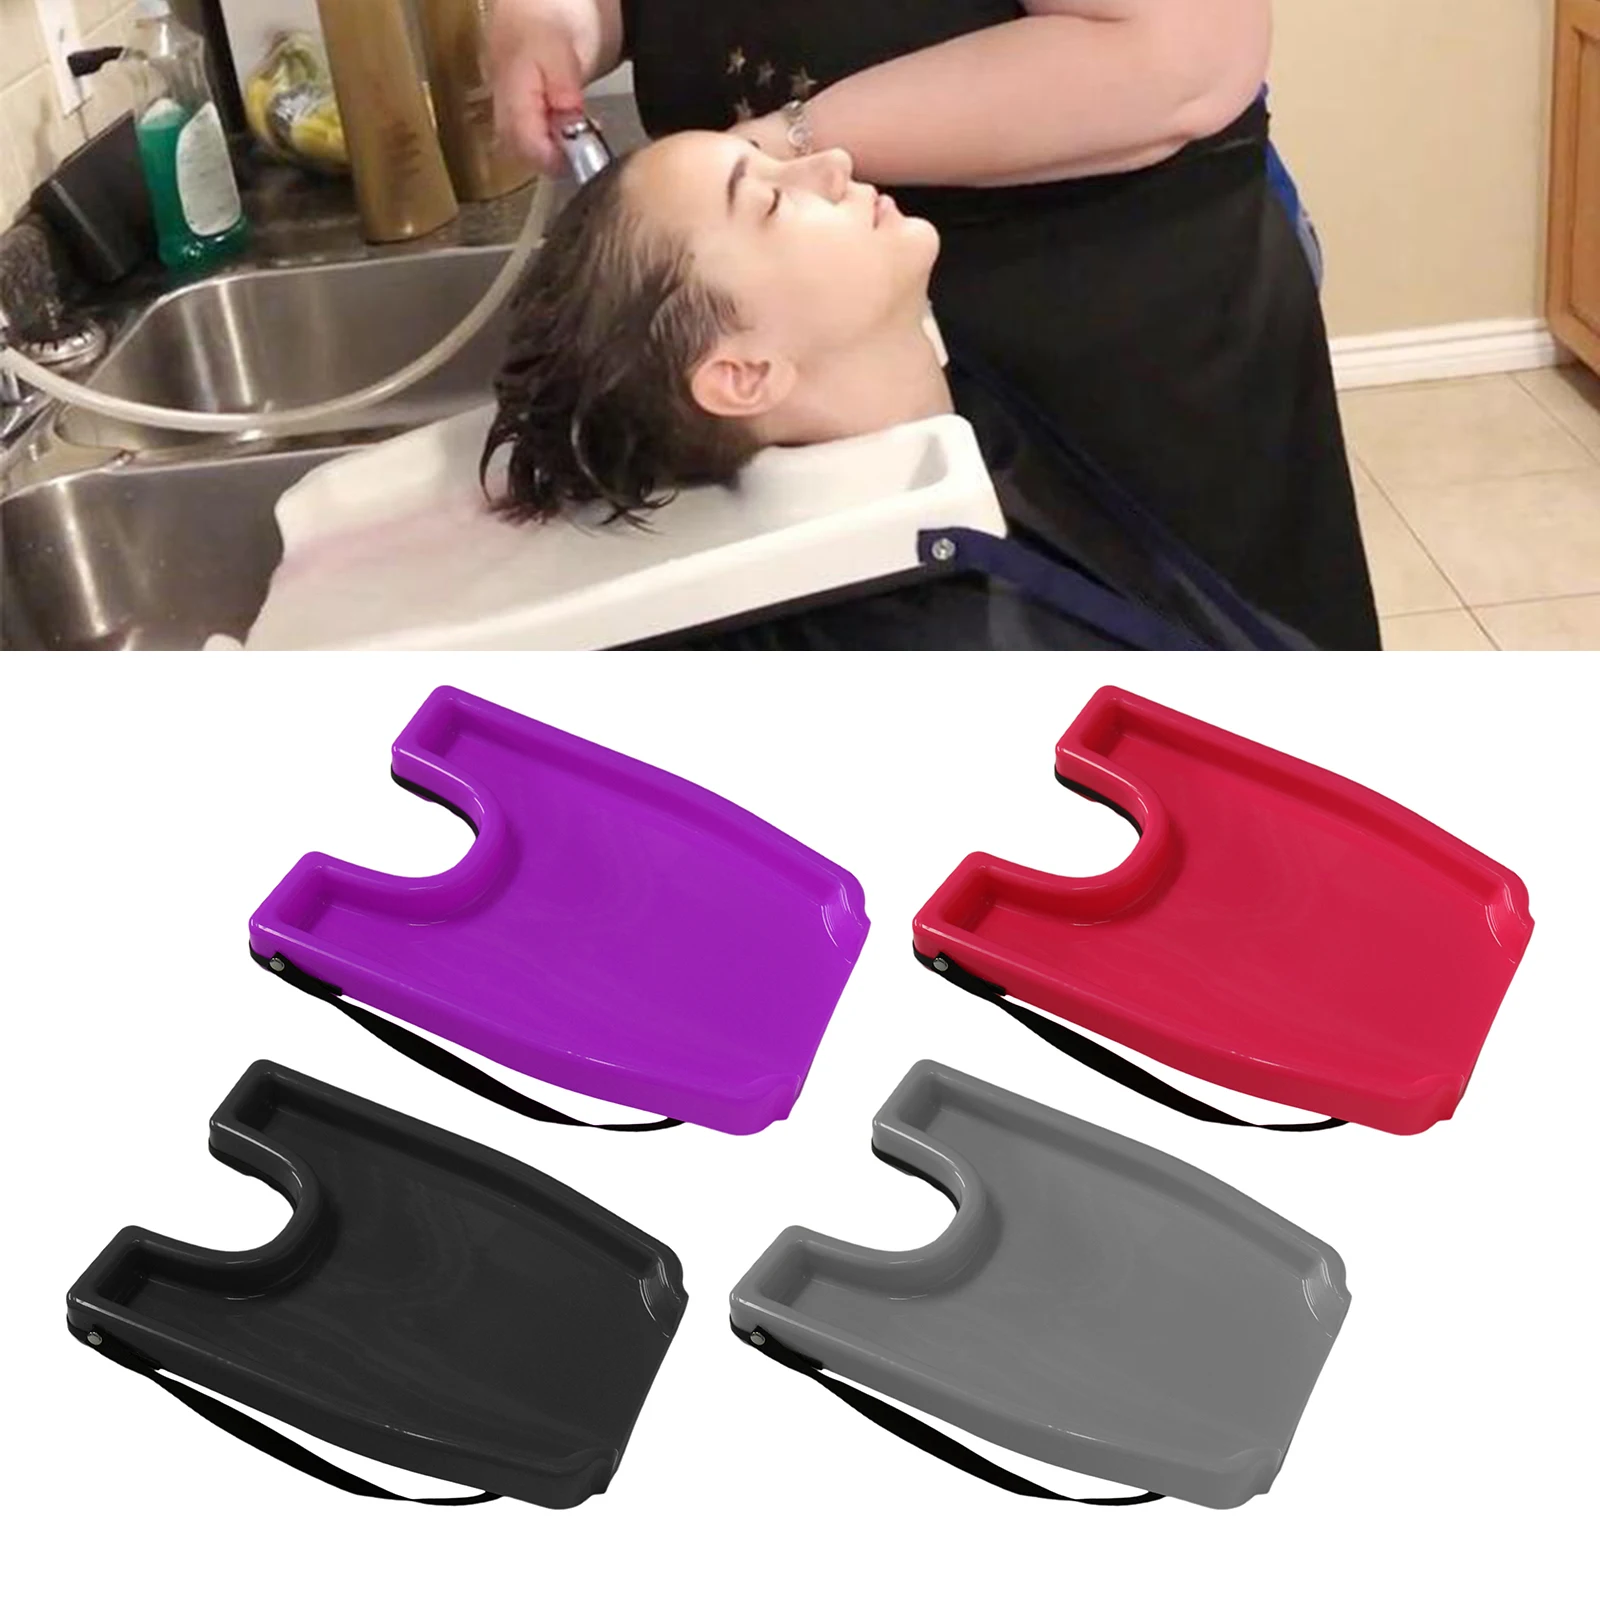 Mobile Salon - Portable Rinse Basin for Washing and Cutting Hair at Home and in Bed, Hair Shampoo Backwash Tray Sink